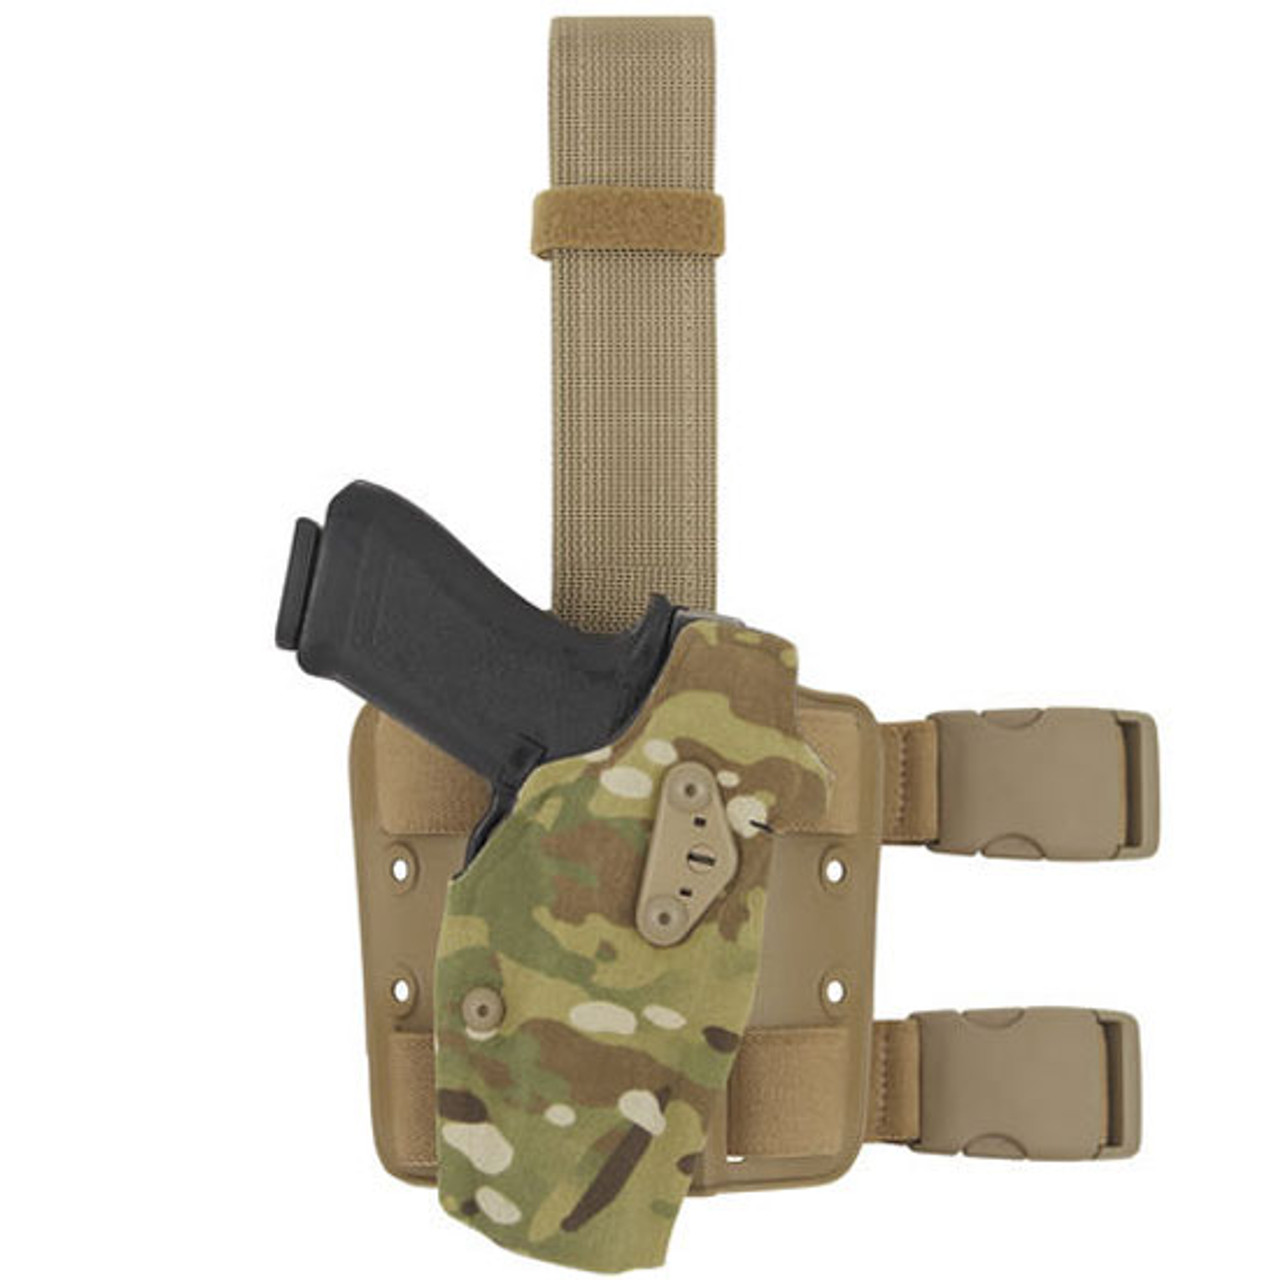 Safariland ALS Optic Tactical Leg Holster for Glock 17, 22 with Light  MultiCam Cordura Finish [FC-781602540278] - Cheaper Than Dirt